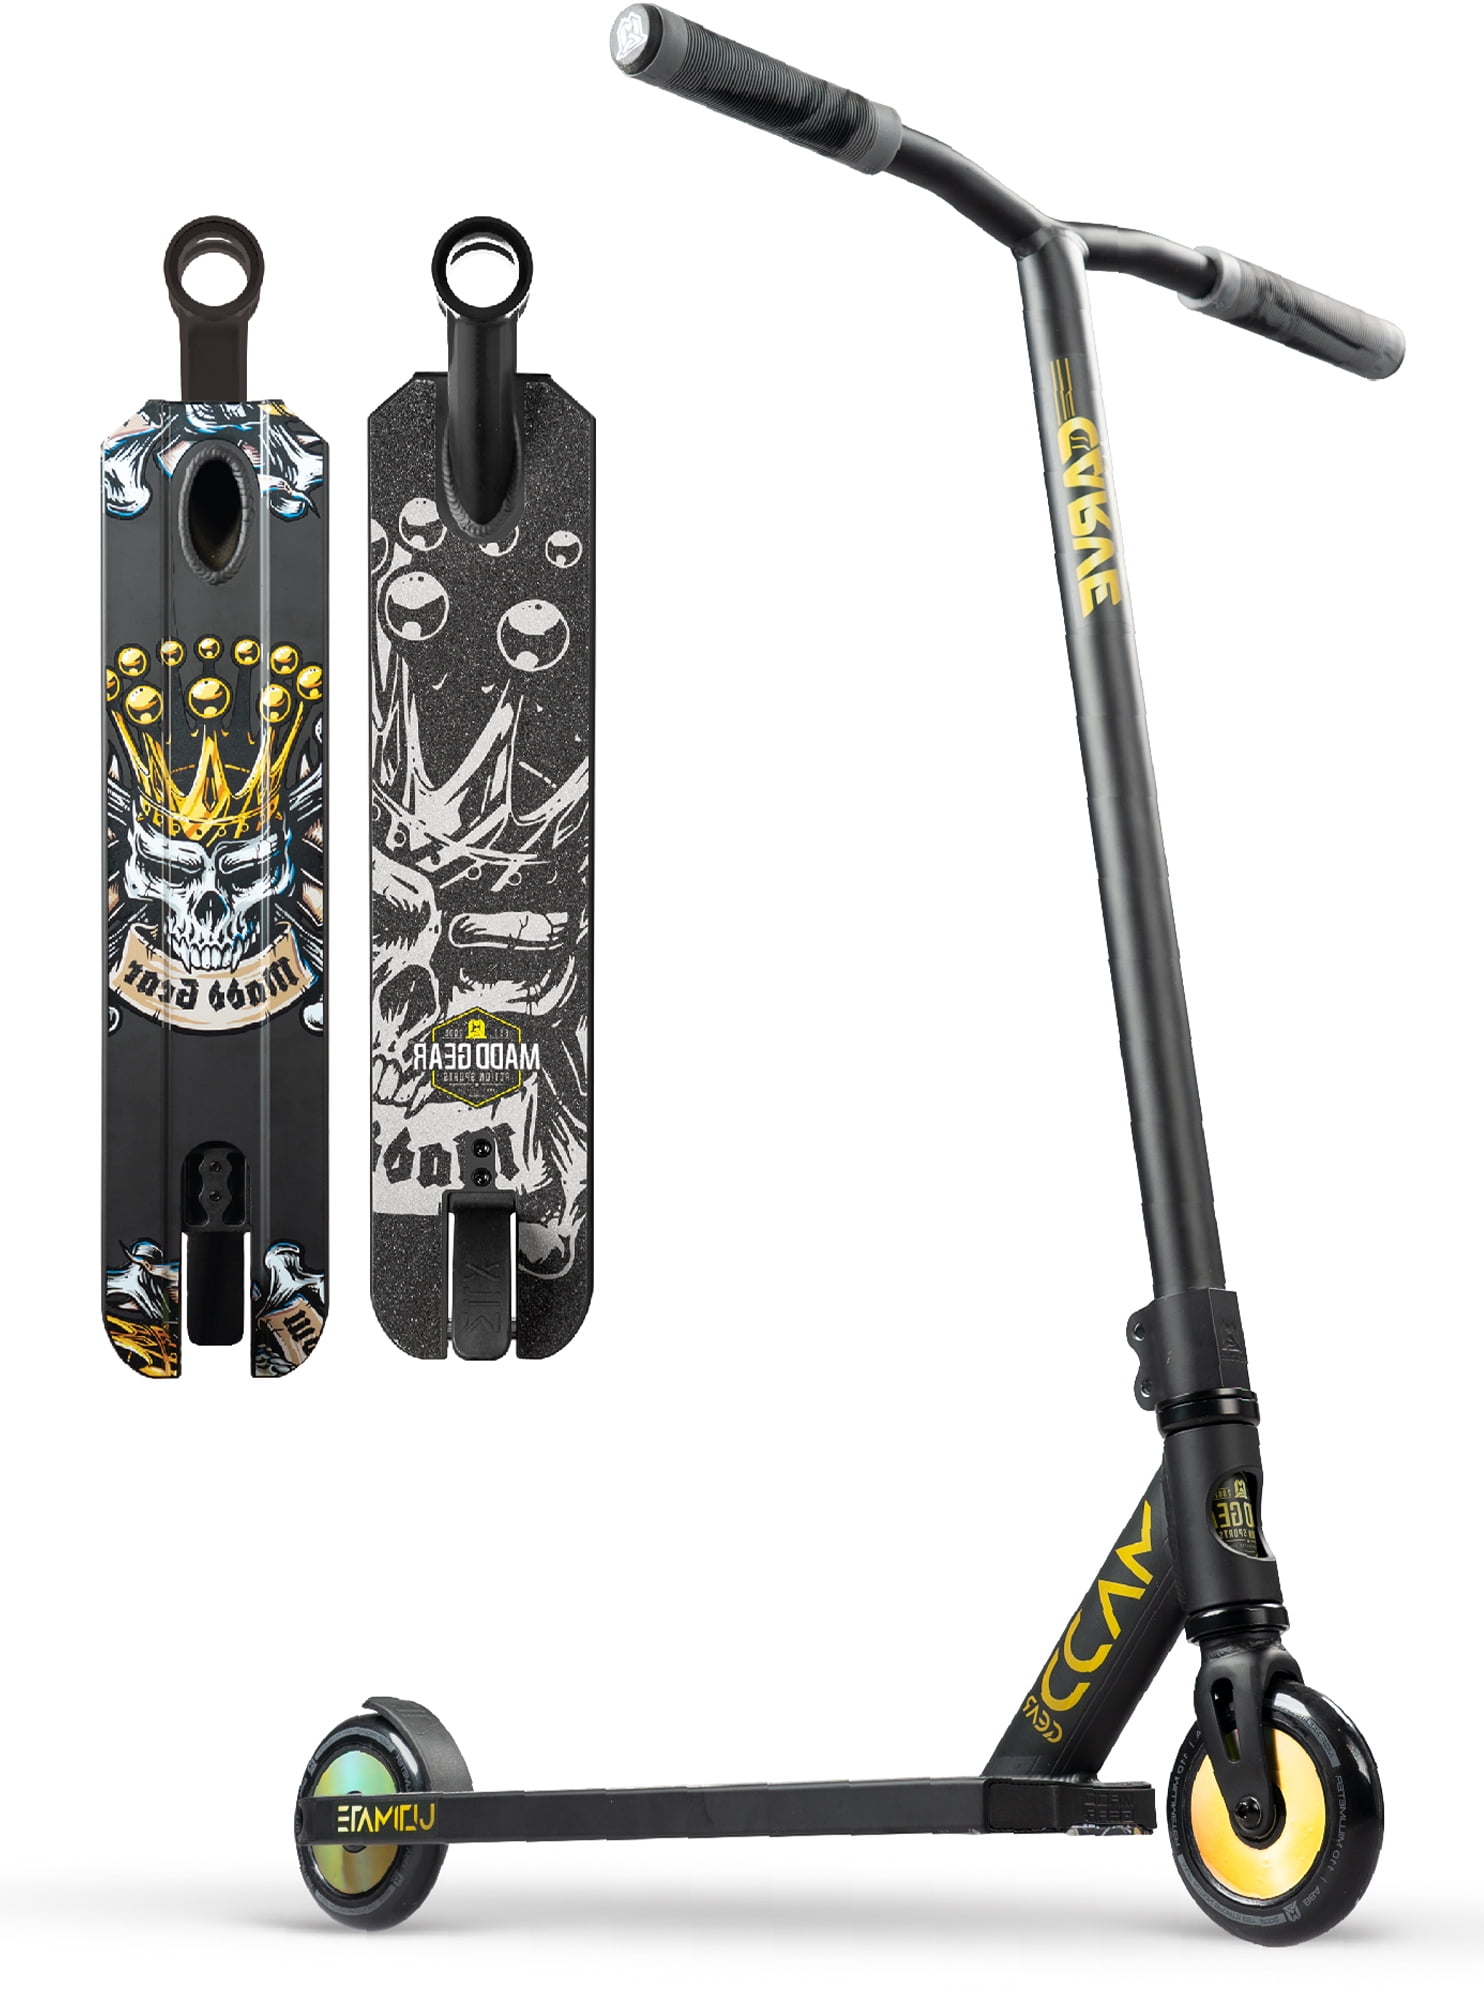 Gear-Carve Ultimate Complete Pro Scooter for Kids 8 and Up-Beginner Stunt BMX Free Style Trick Scooter -